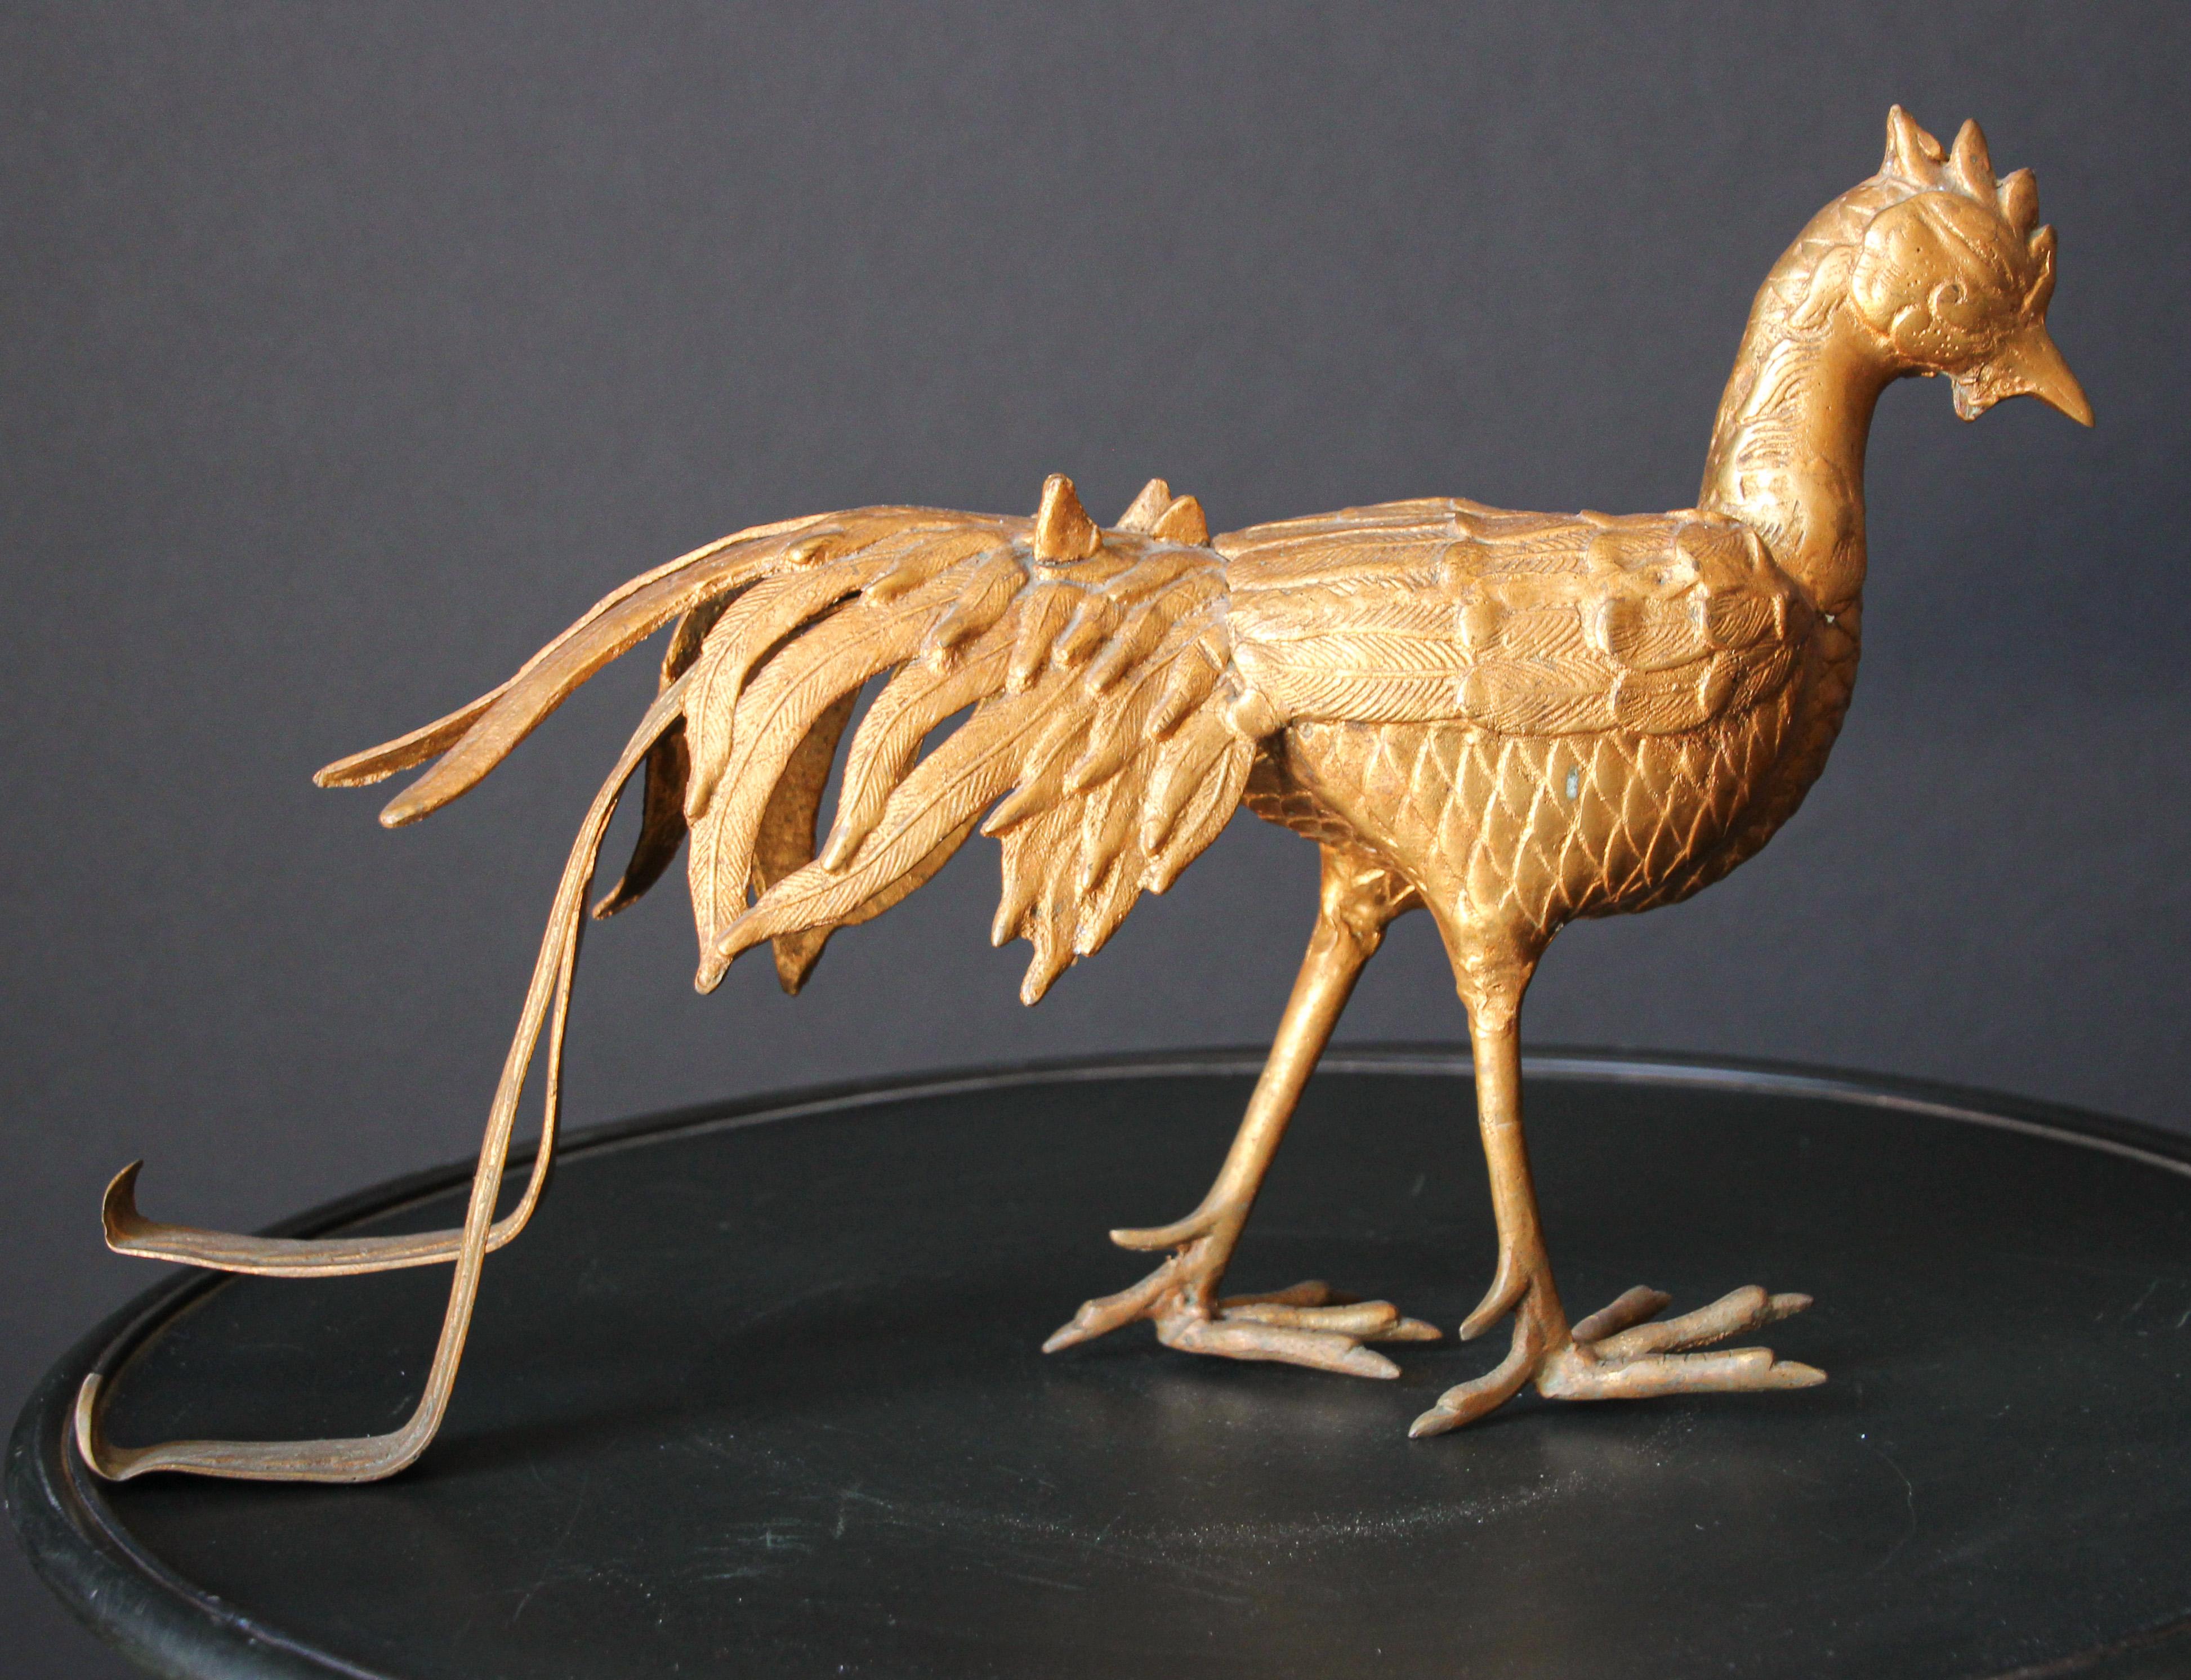 Large Hollywood Regency brass peacock statue or sculpture. 
Midcentury Anglo-Indian cast brass peacocks
This animal statue or figure would make a great addition to a midcentury or Hollywood Regency interior.
Asian bronze sculpture casted using